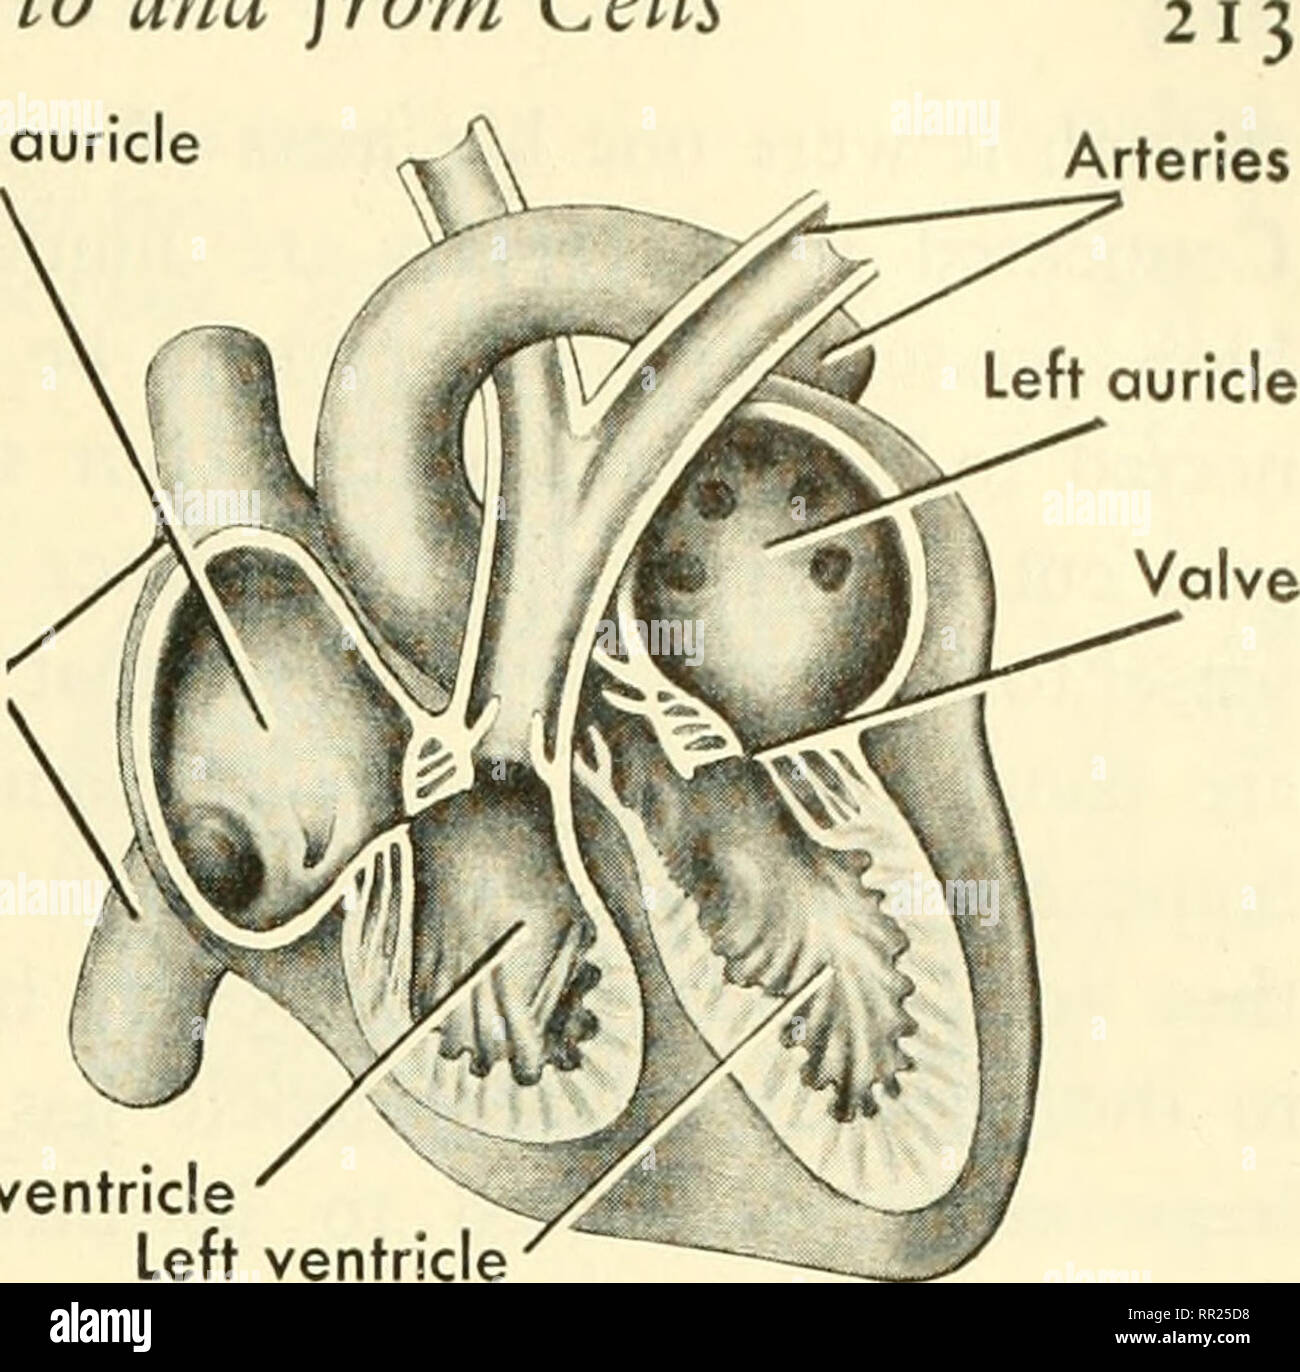 Adventures with animals and plants. Biology. Right ventric Fig. 215 (above)  The heart cut open. Note the four chambers. From which chambers and through  which tubes does blood leave? Fig. 214 (